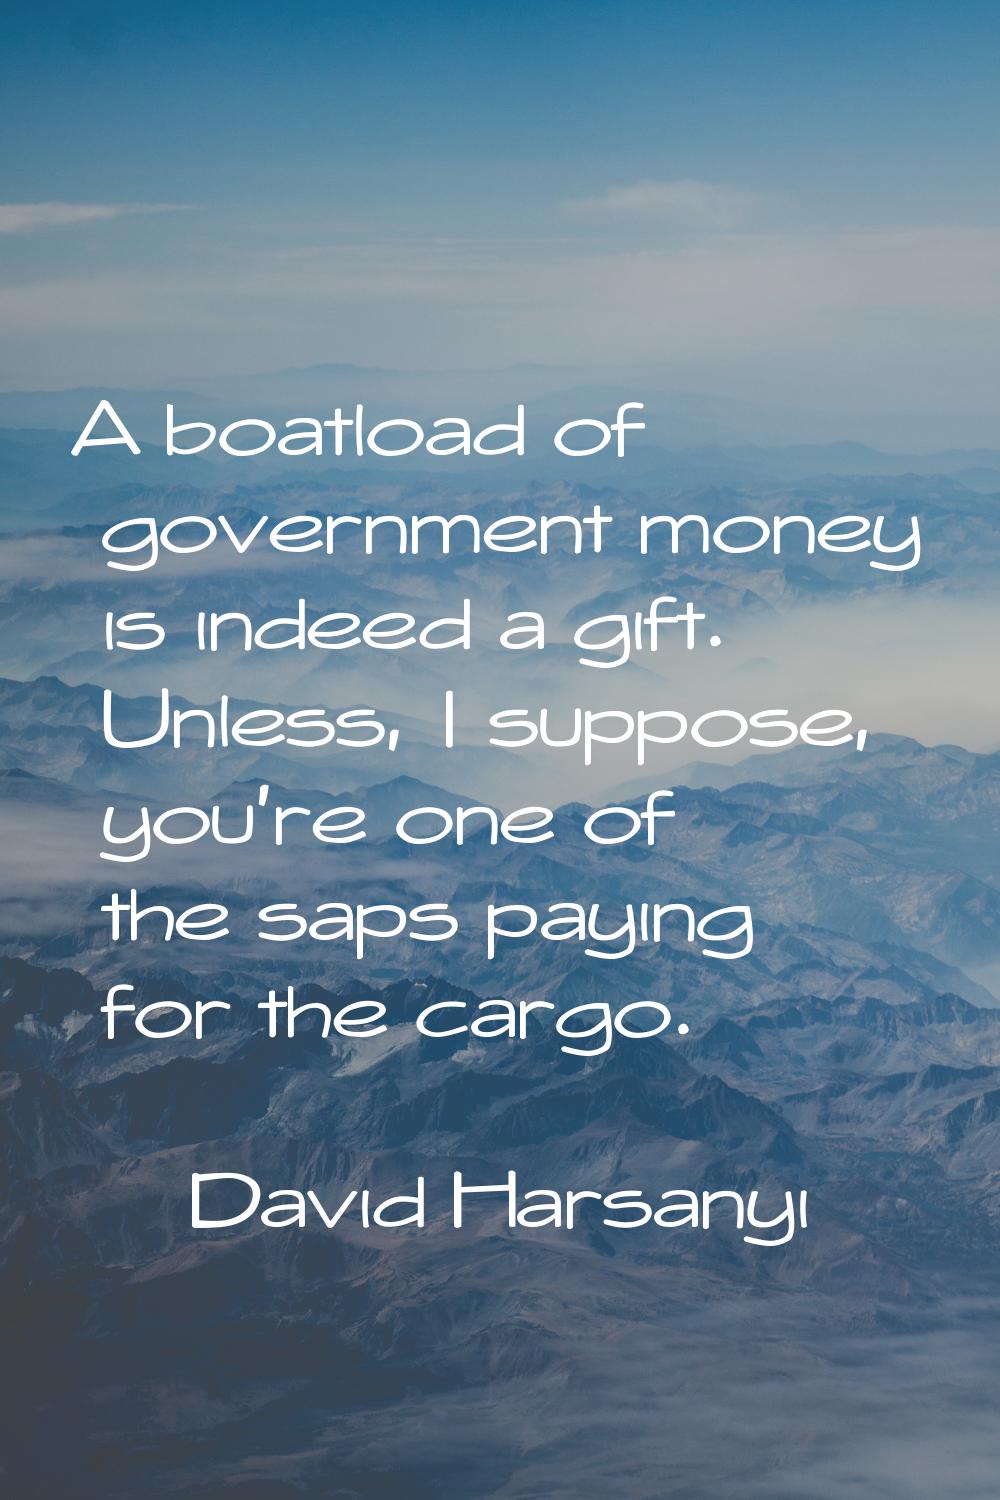 A boatload of government money is indeed a gift. Unless, I suppose, you're one of the saps paying f